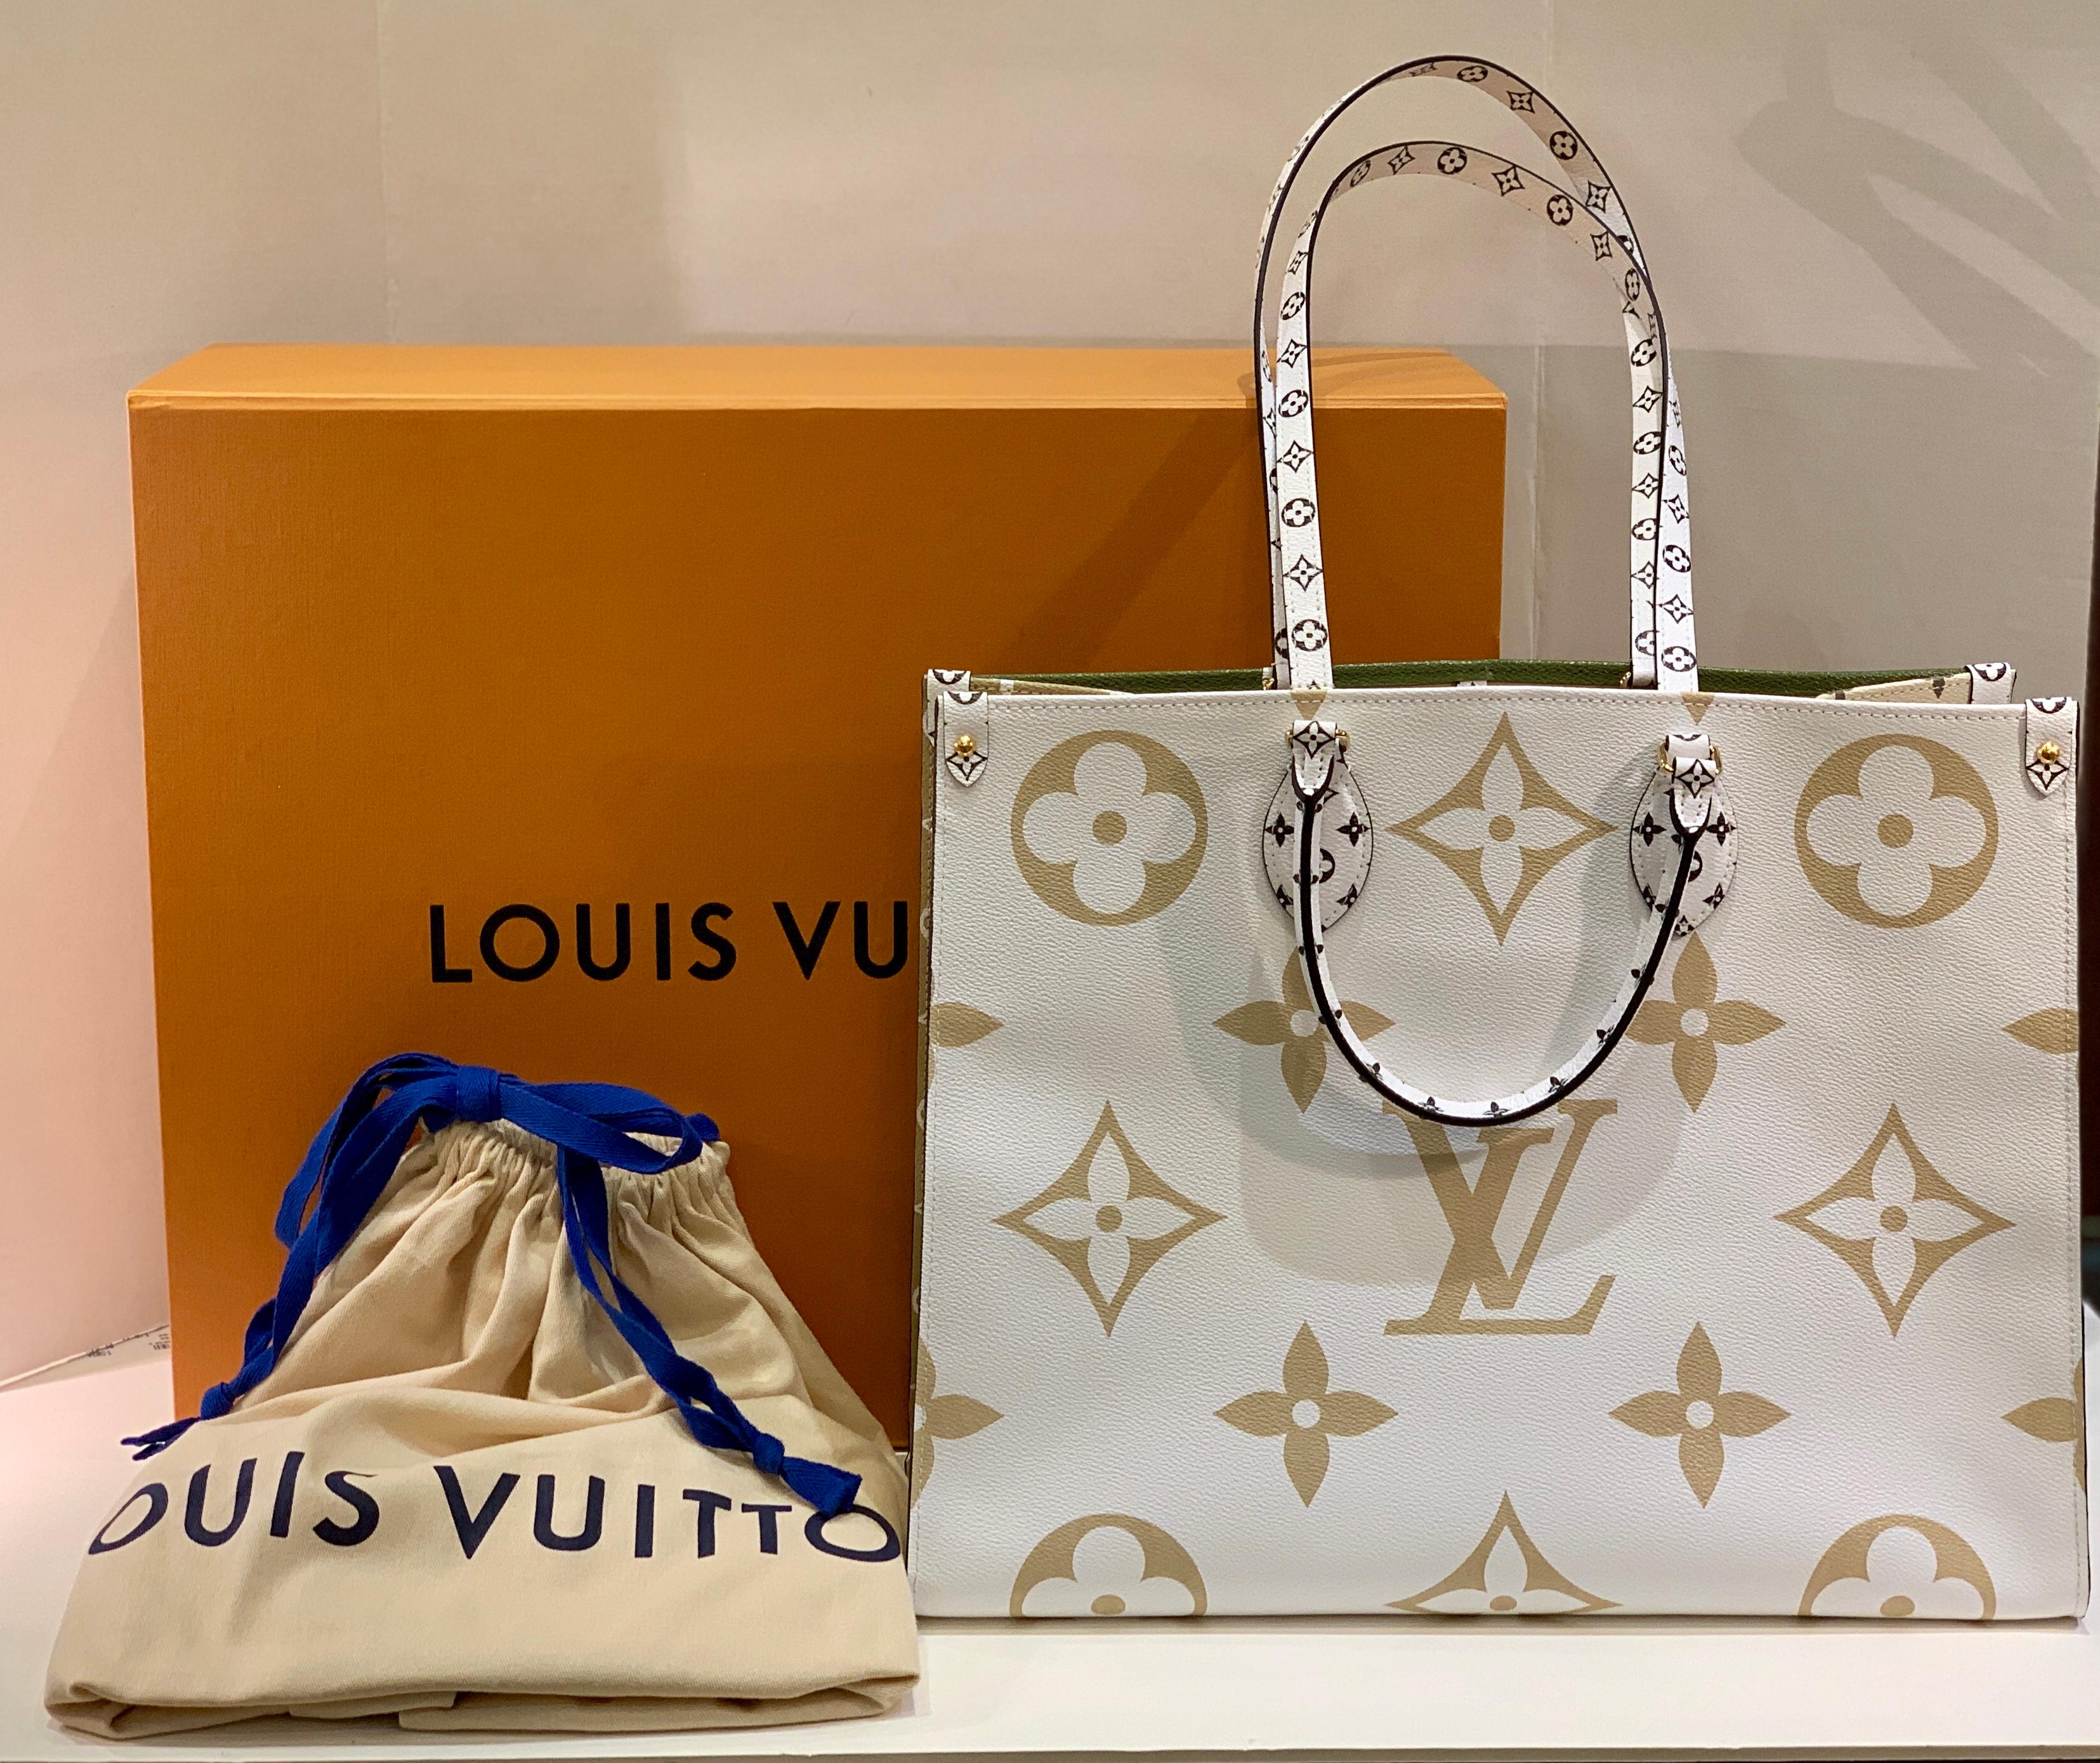 Get the bag thousands of women are waiting for!  Brand new and never used, with all tags and packaging.

From the Louis Vuitton website, 